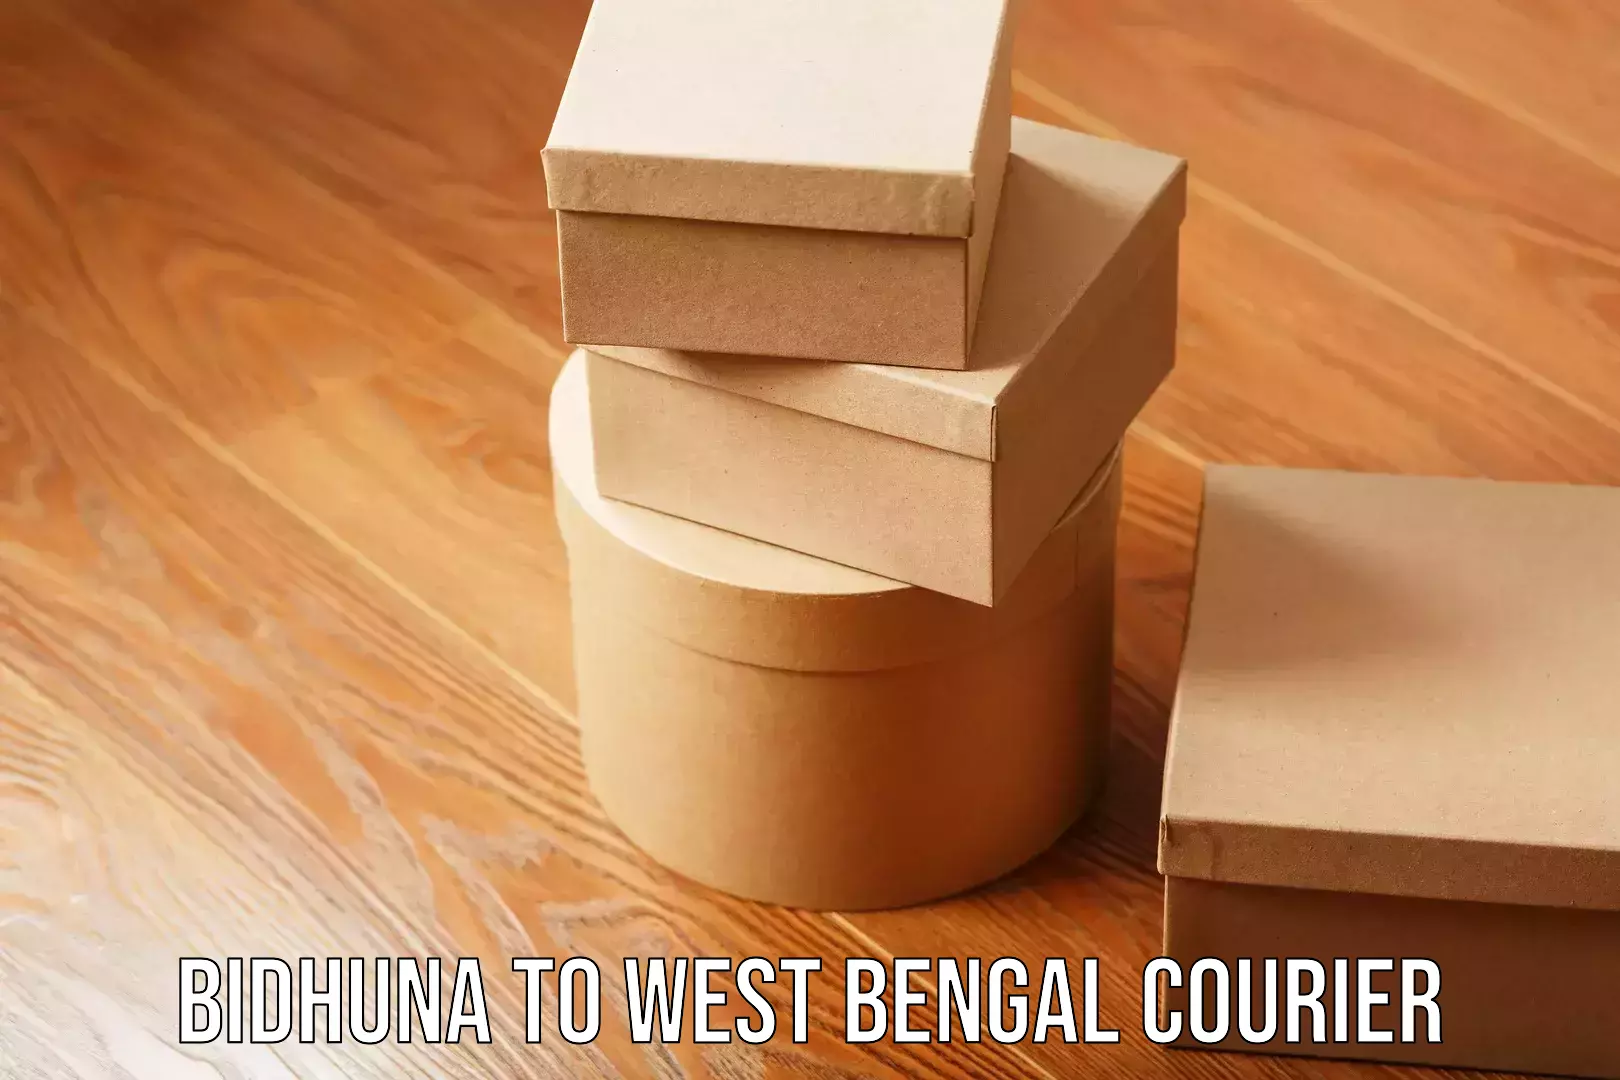 On-call courier service Bidhuna to West Bengal